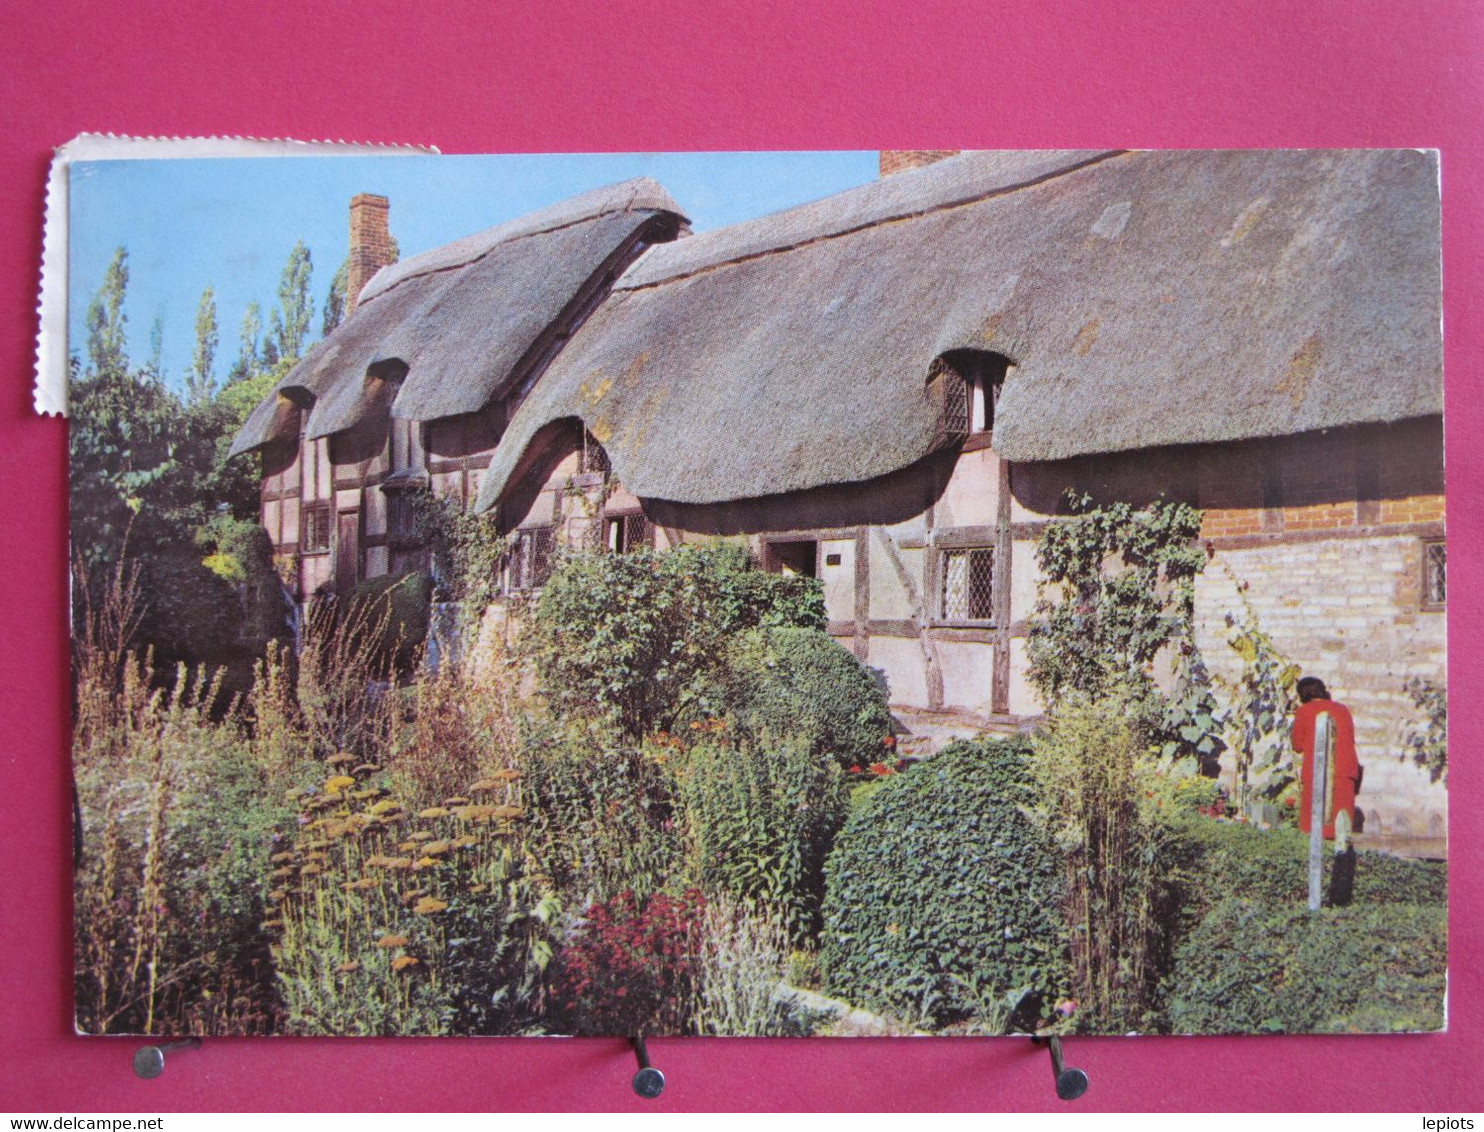 Visuel Très Peu Courant - Angleterre - Stratford Upon Avon - Anne Hathaway's Cottage - Shottery - R/verso - Stratford Upon Avon